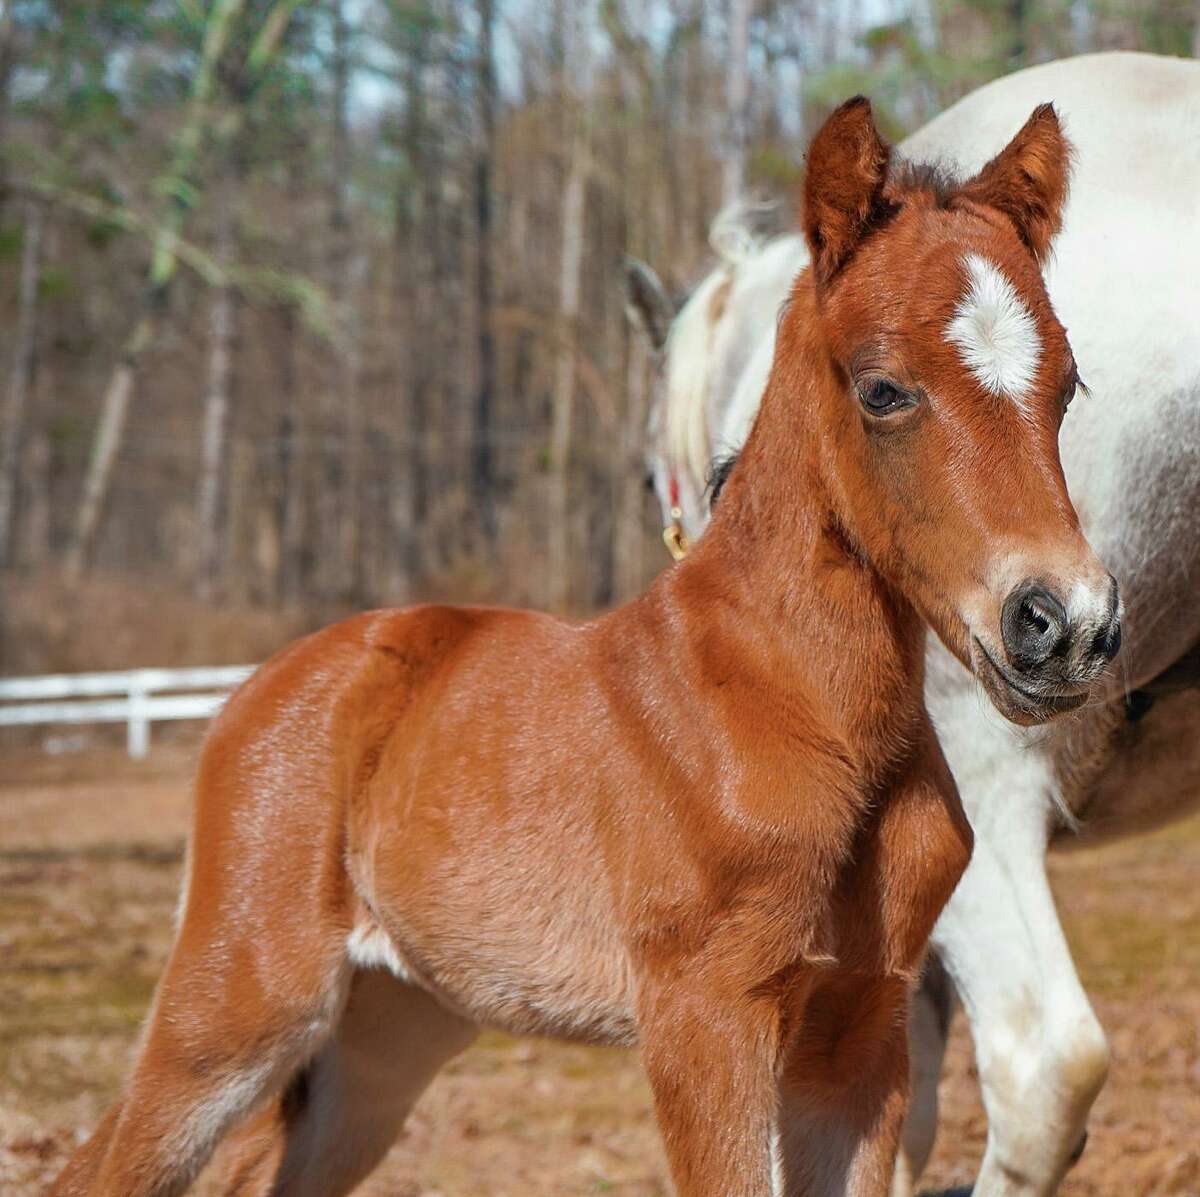 The Rising Starr horse rescue in Wilton, CT, welcomed Rumi into their fold when she was born on March 7, 2020.